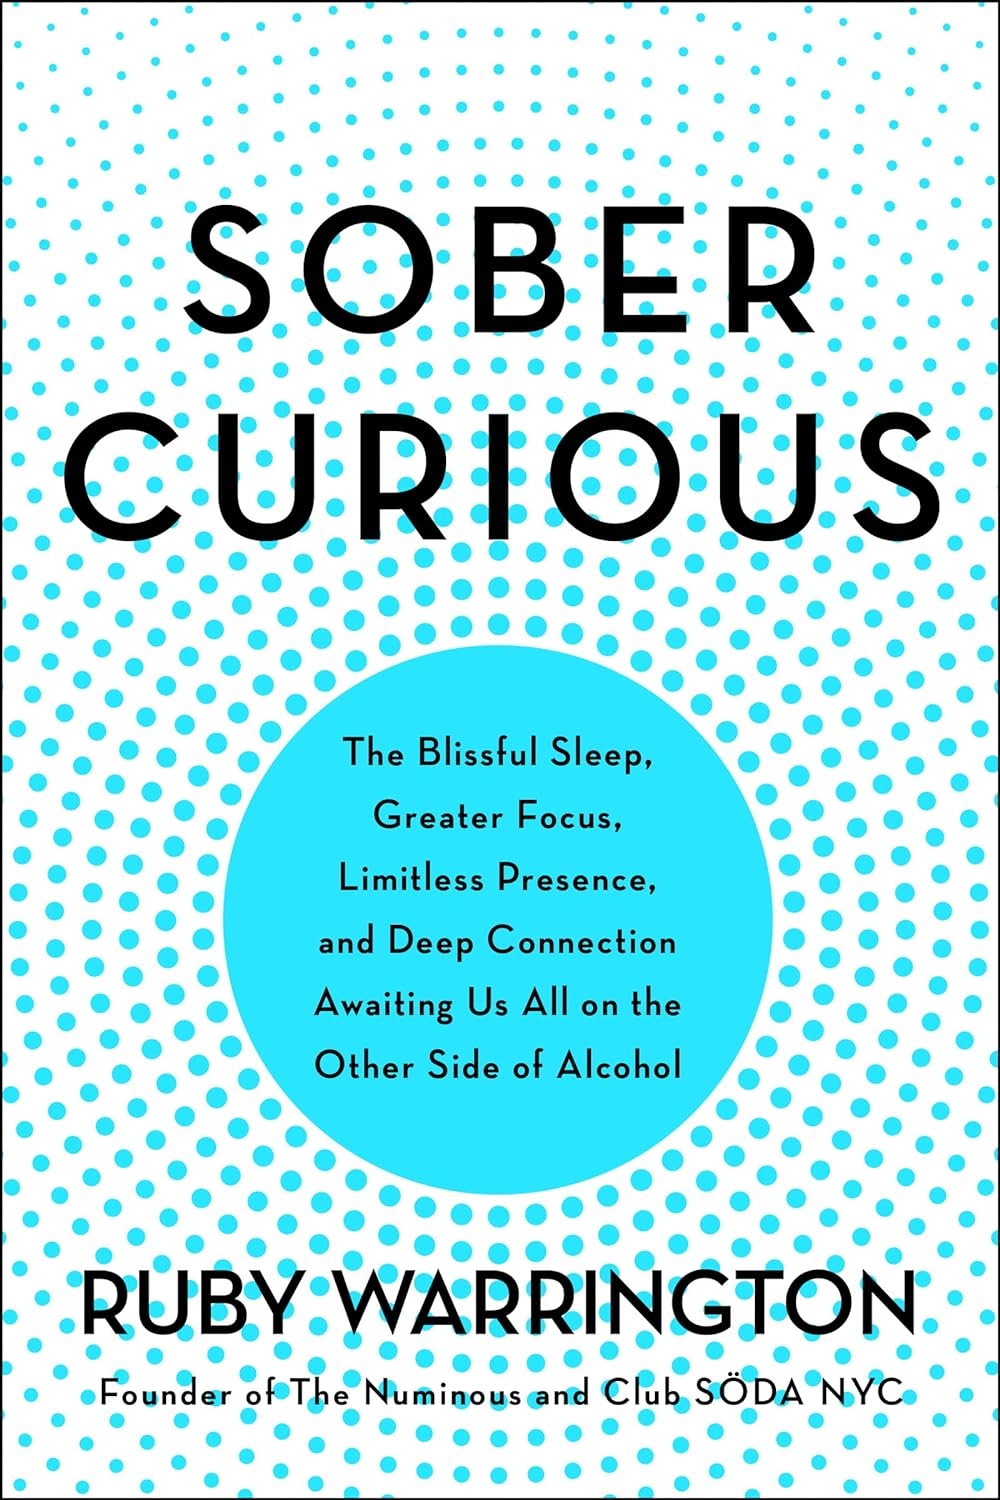 Sober Curious: The Blissful Sleep, Greater Focus, Limitless Presence, and Deep Connection Awaiting Us All on the Other Side of Alcoho